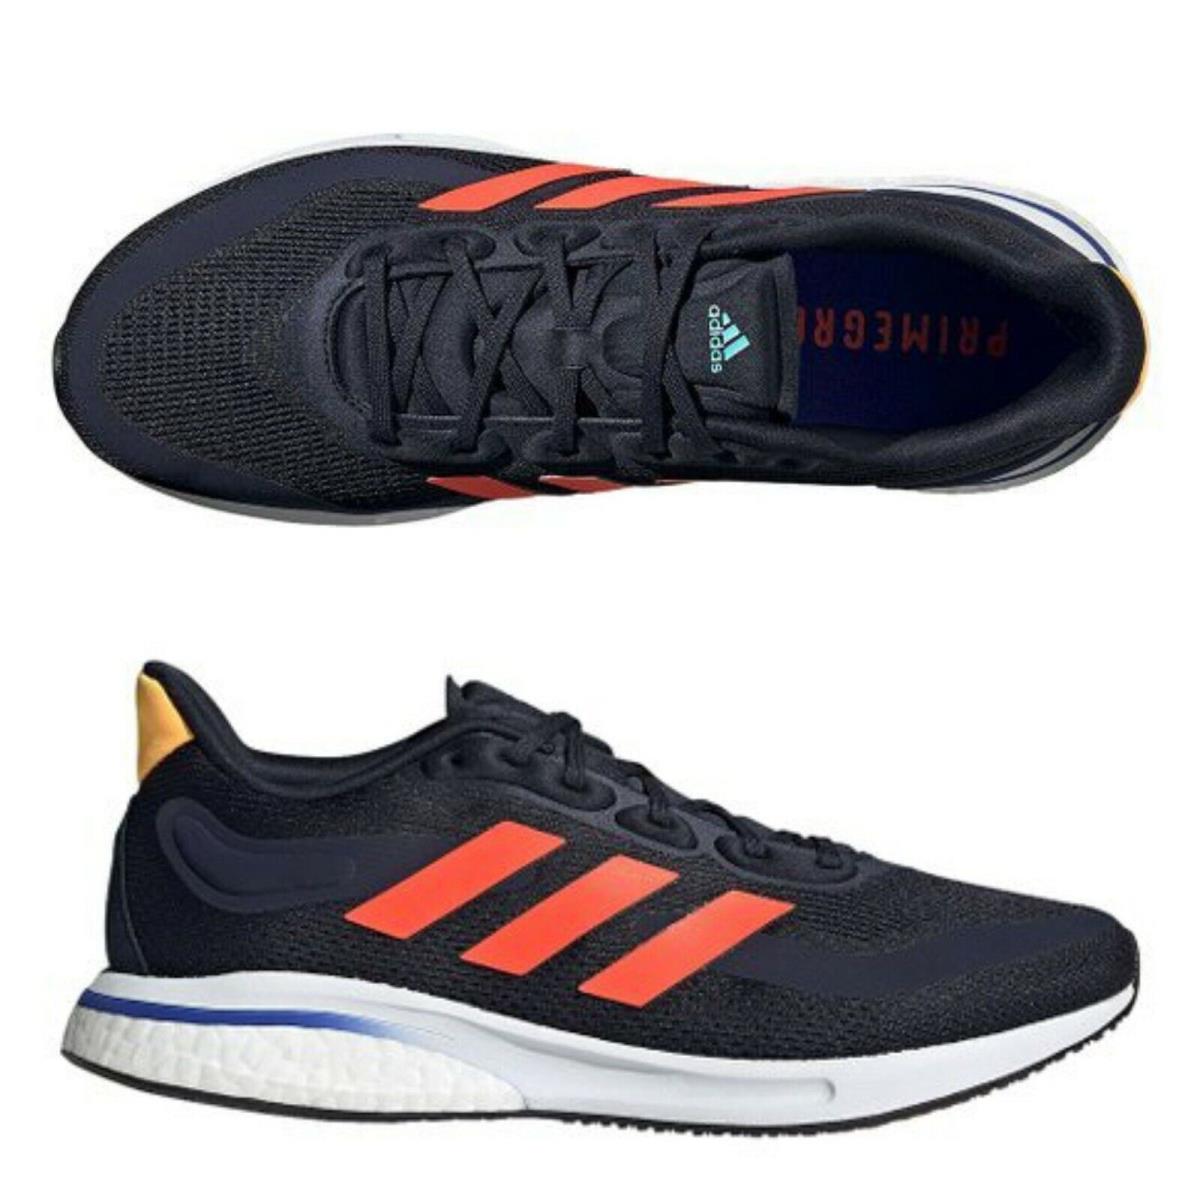 Adidas Supernova Men`s Running Shoes in Legend Ink Solar Red Size 10